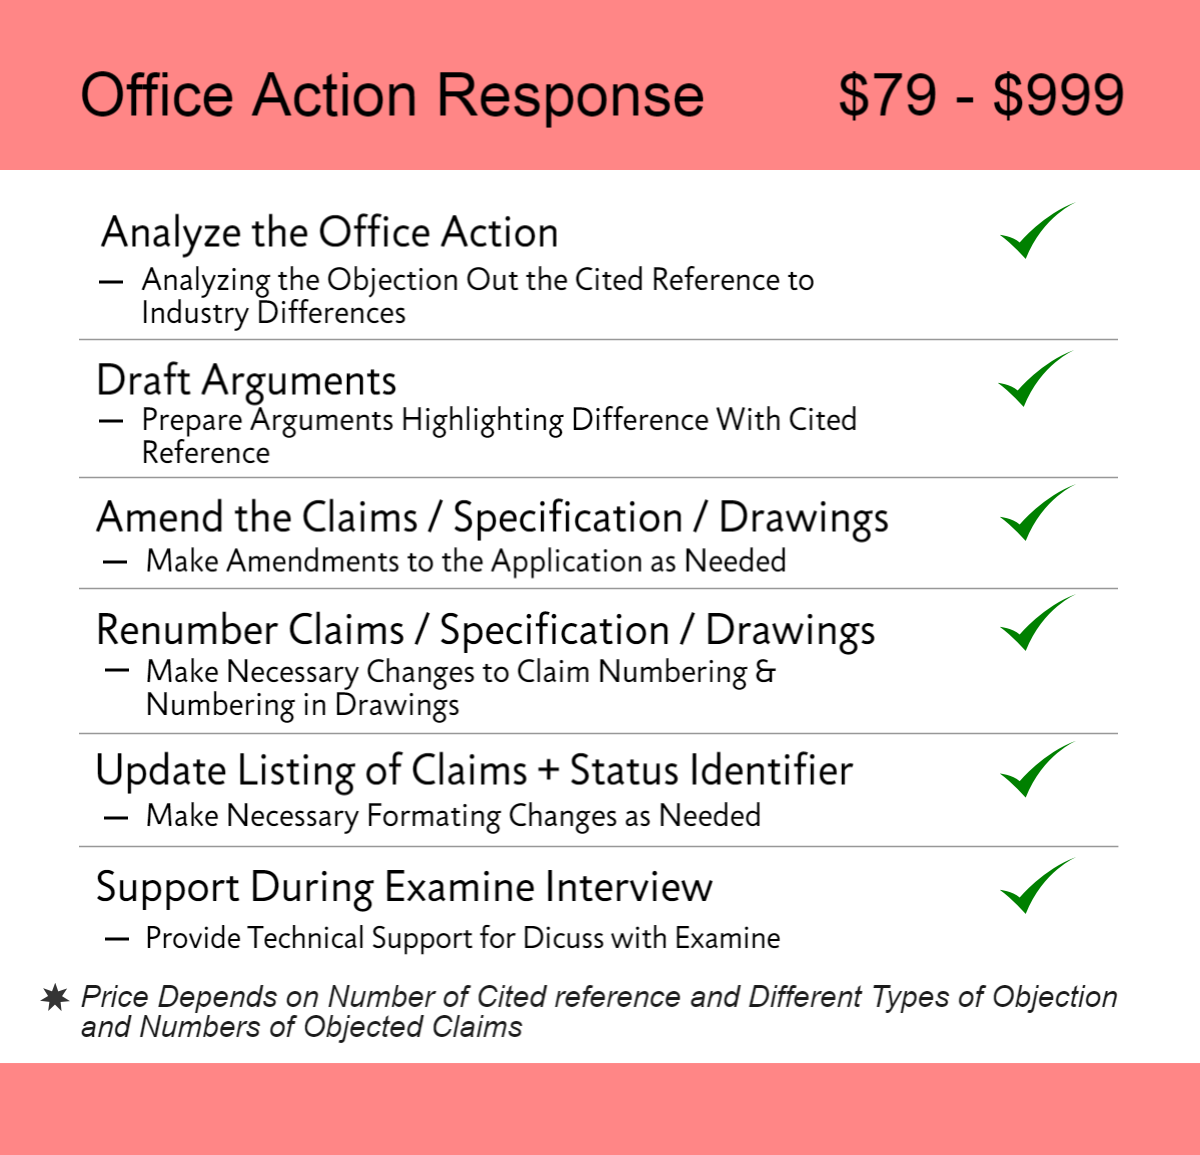 Office Action Response